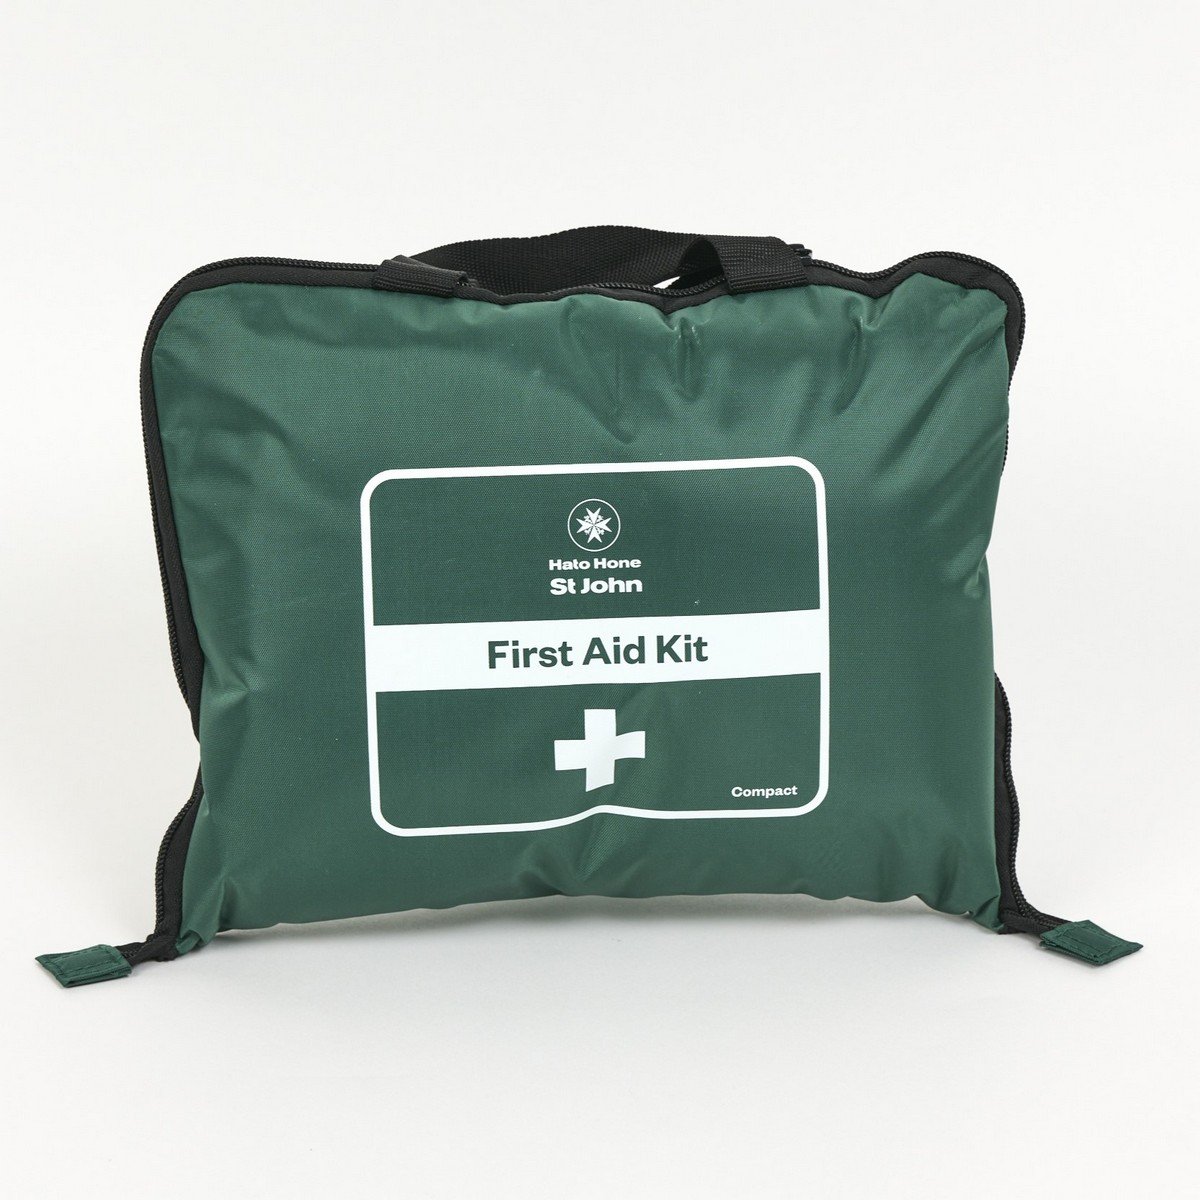 St John Compact First Aid Kit